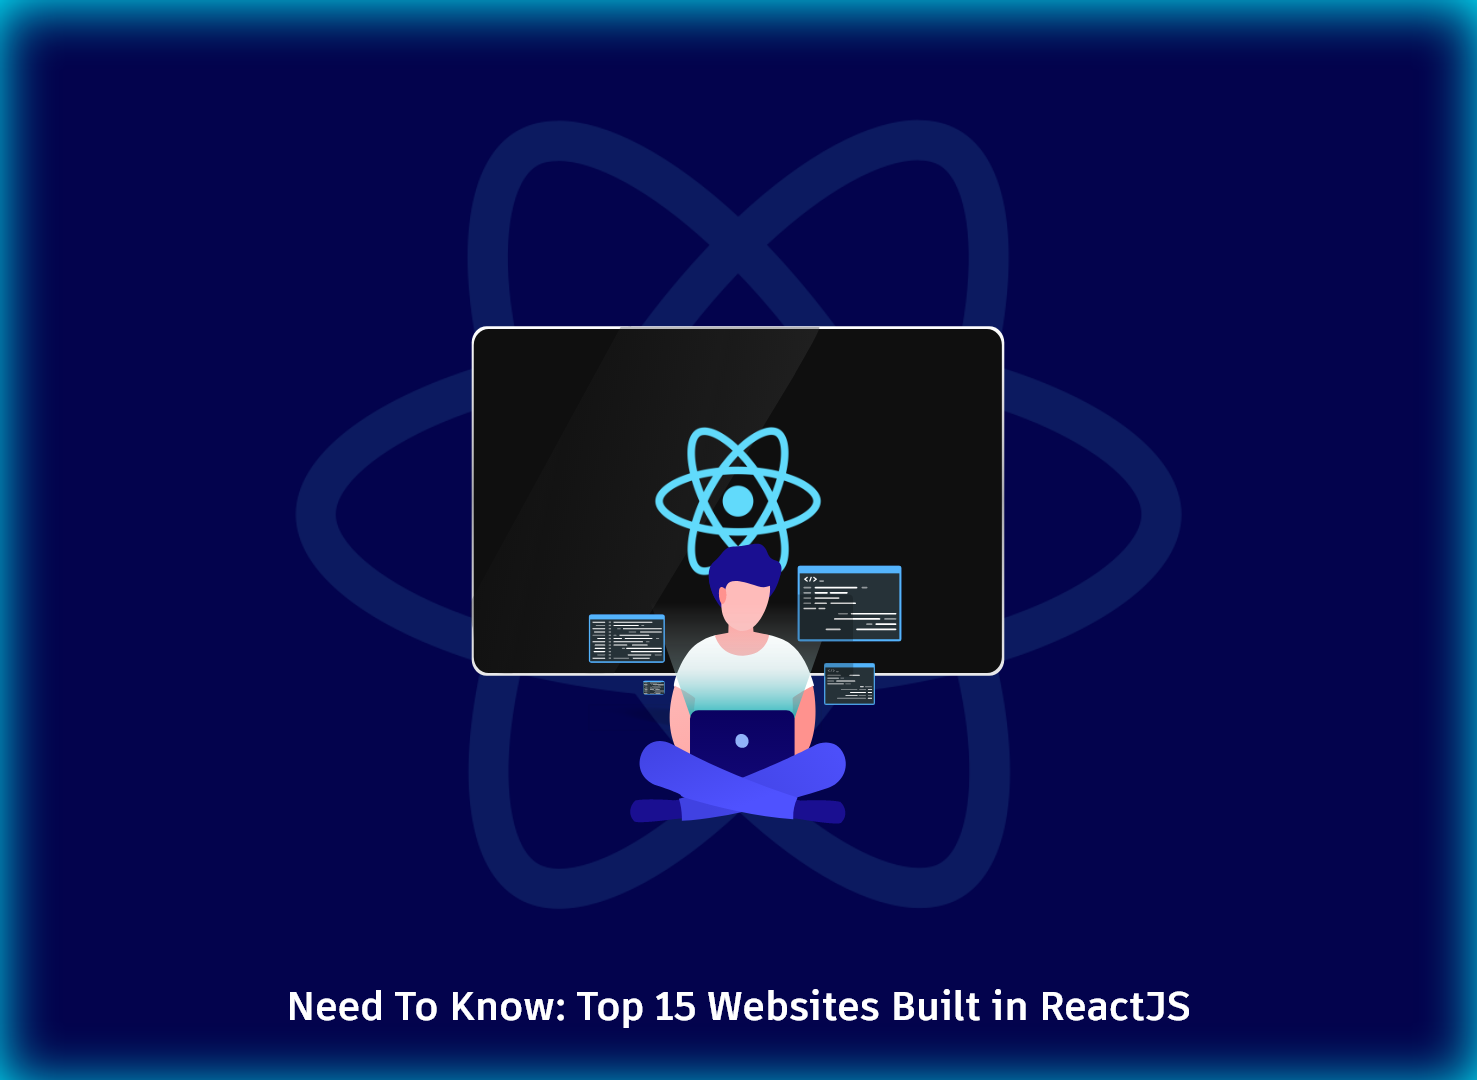 Need to Know: Top 15 Websites Built in ReactJS 